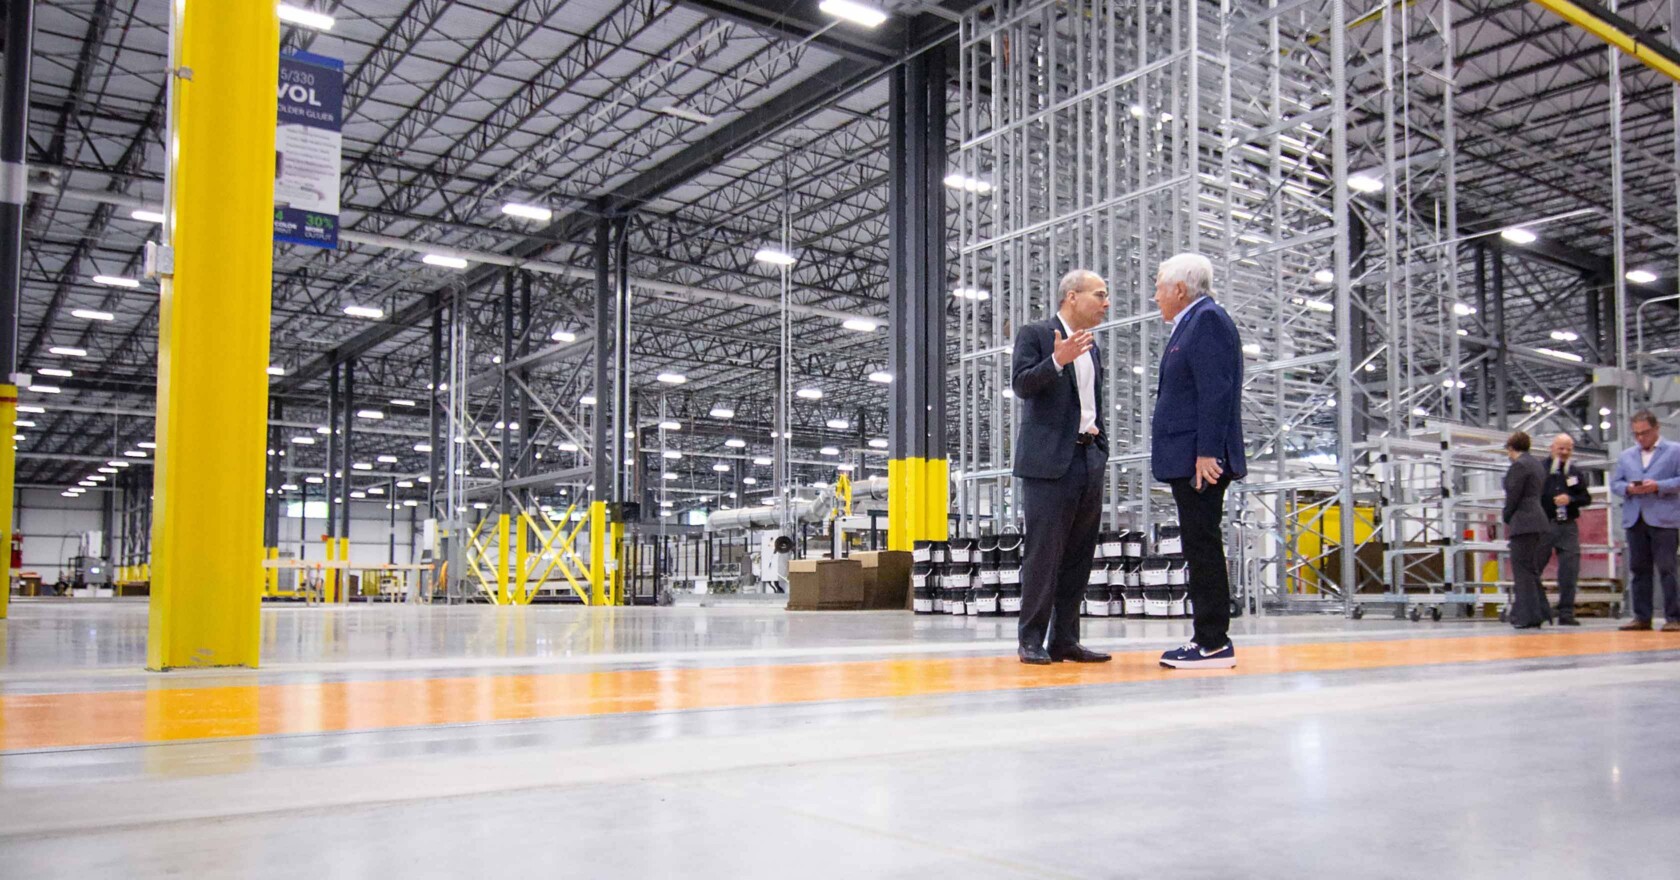 Two men standing in a warehouse talking to each other.